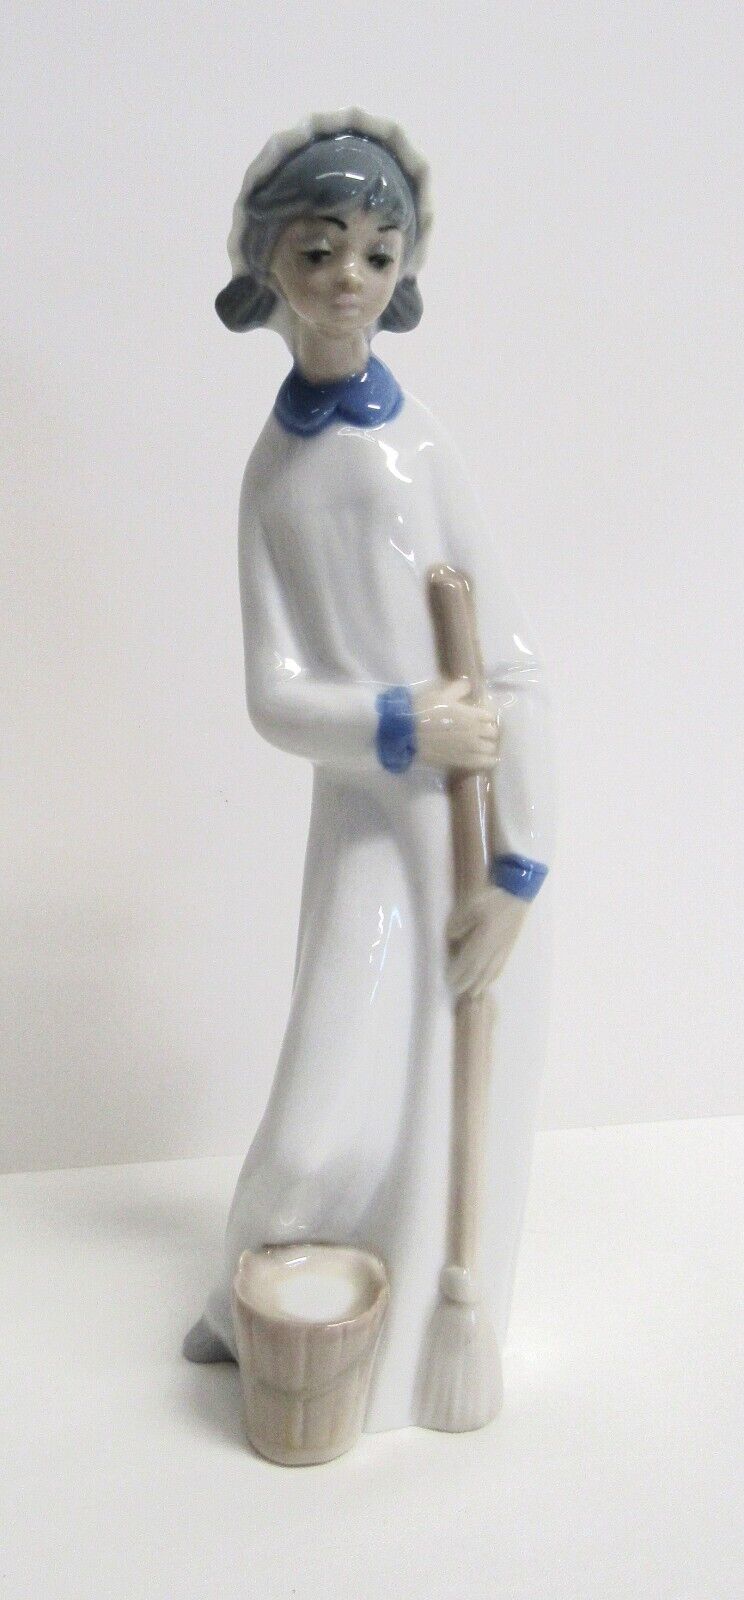 Casades Porcelain Young Girl with Mop and Bucket - Spain - Near MINT, EUC